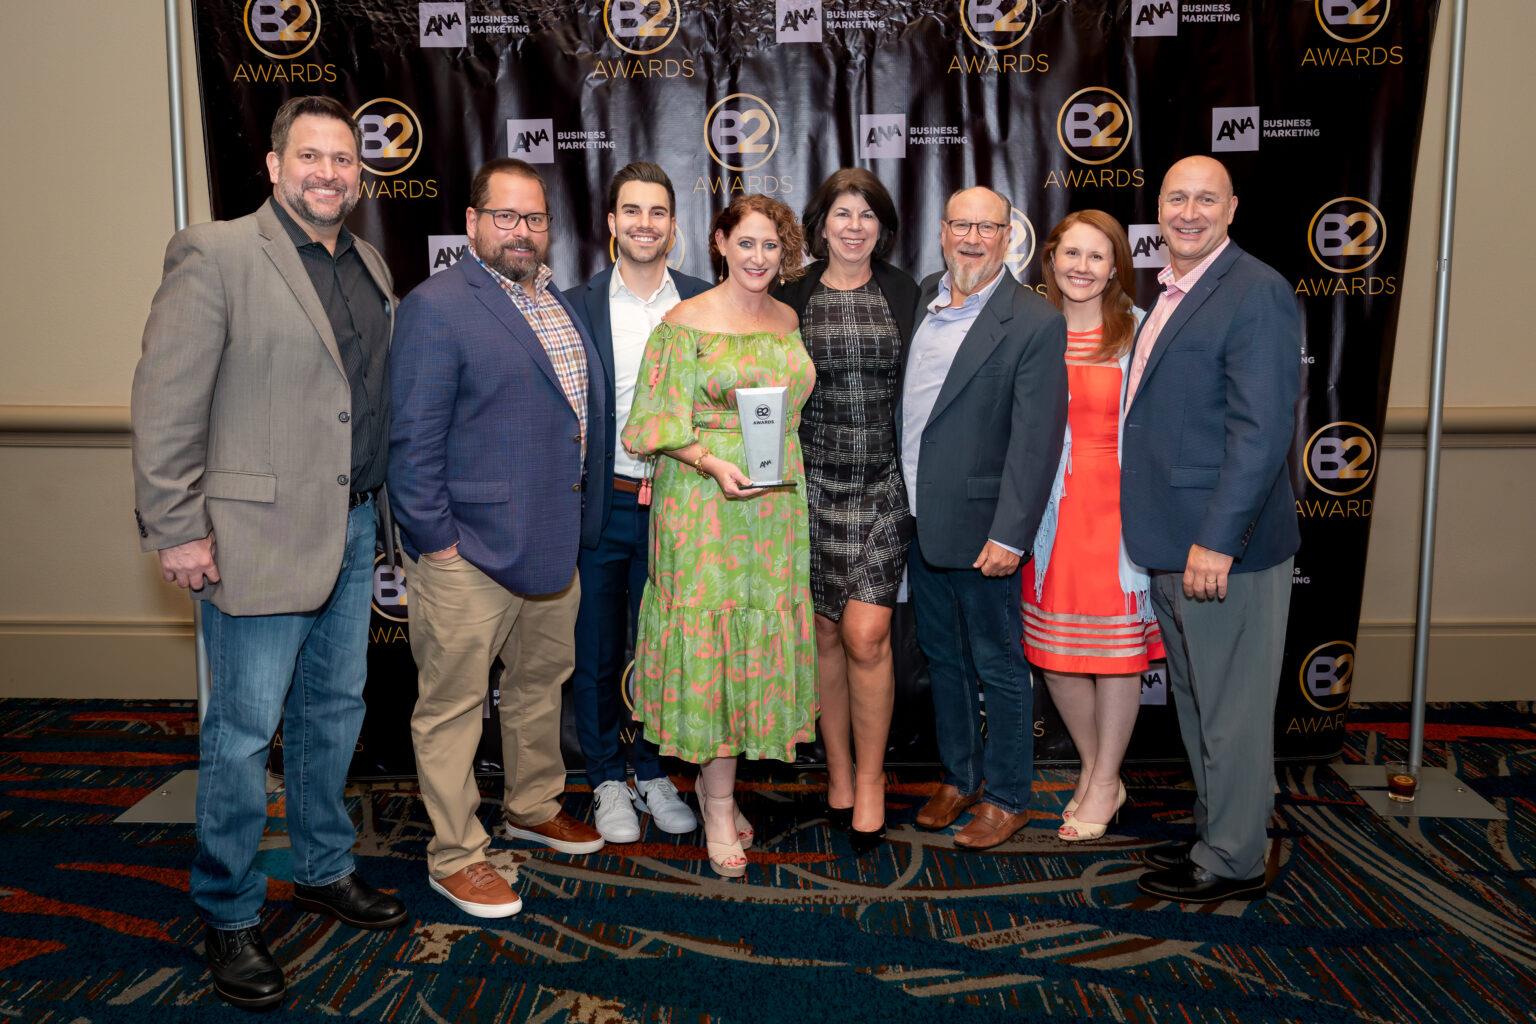 Award Season Avalanche: Mower recognized as a top Large Agency of the Year by the Association of National Advertisers